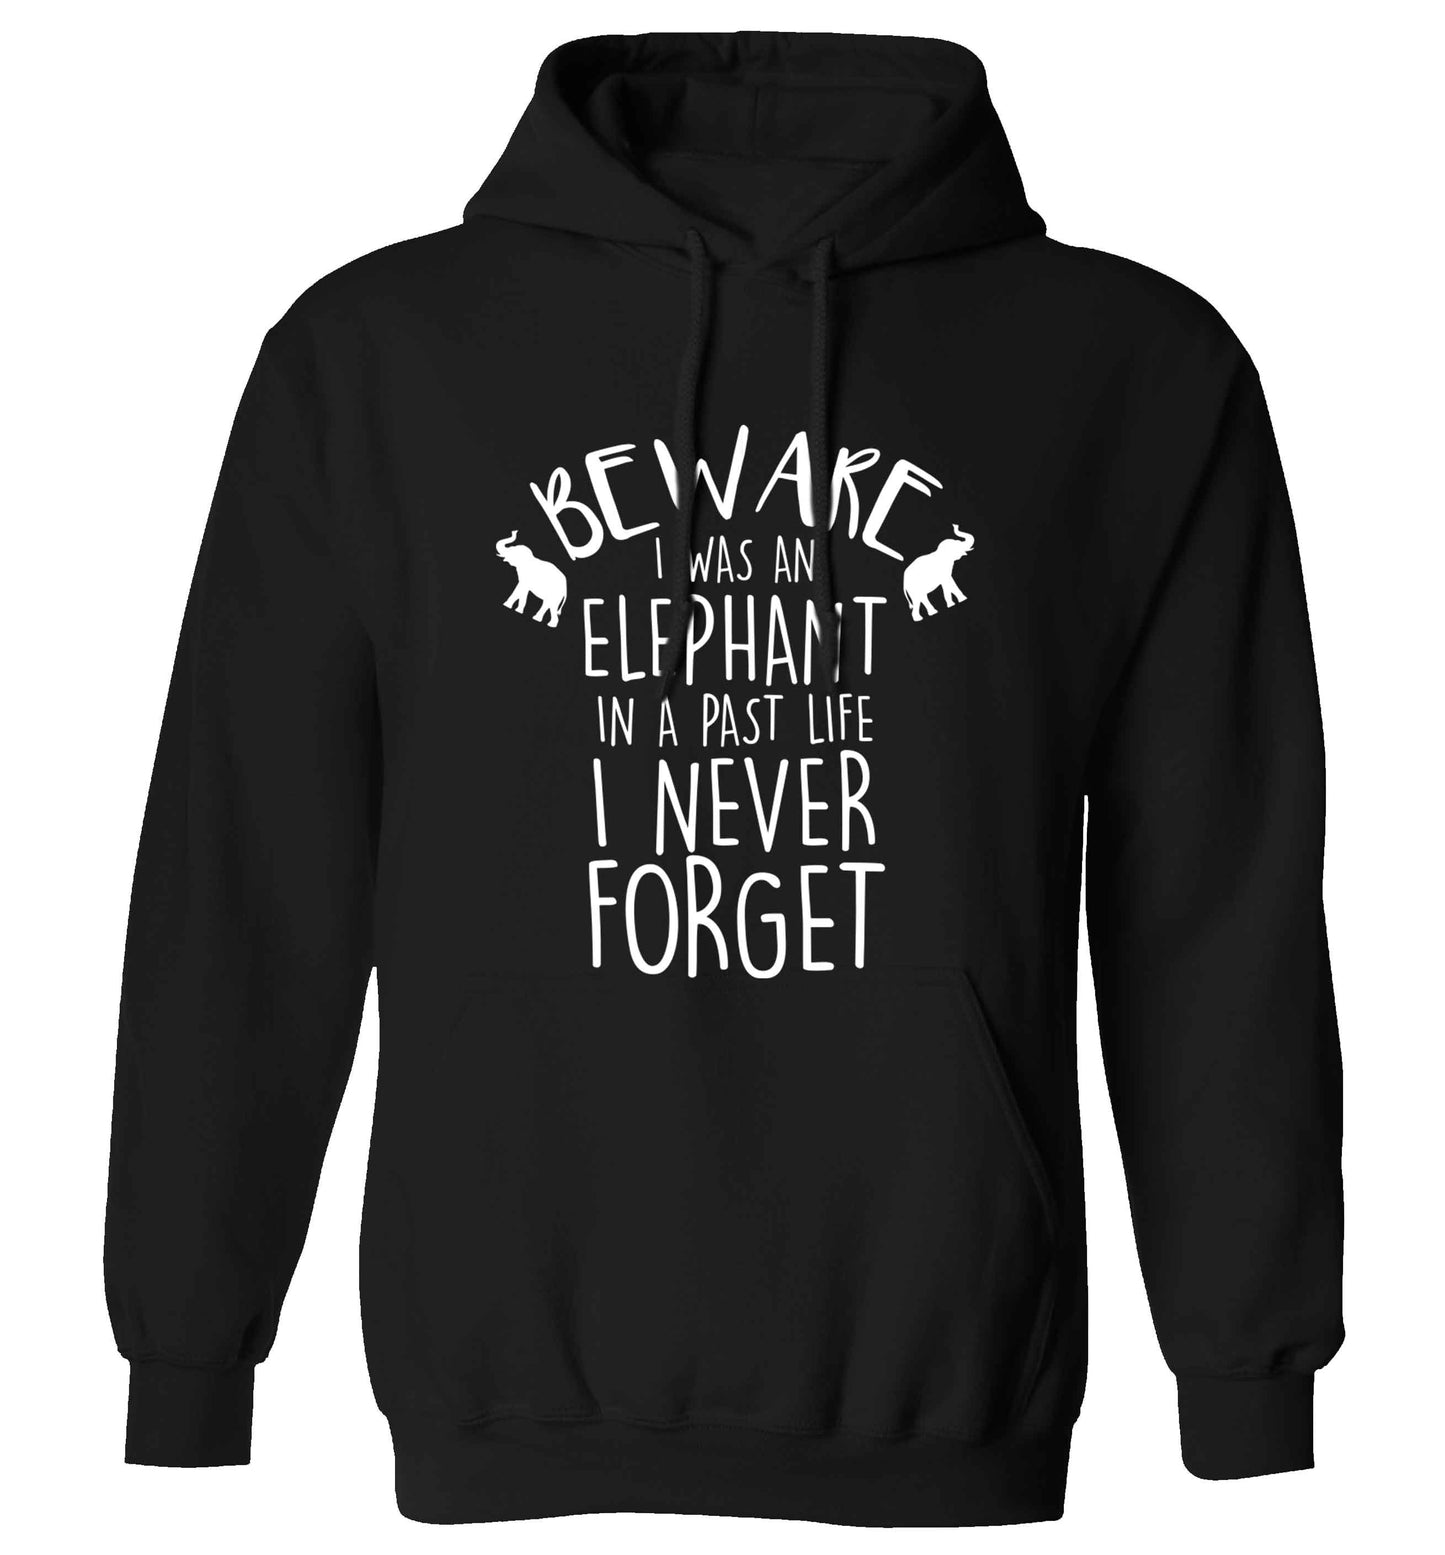 Beware I was an elephant in my past life I never forget adults unisex black hoodie 2XL